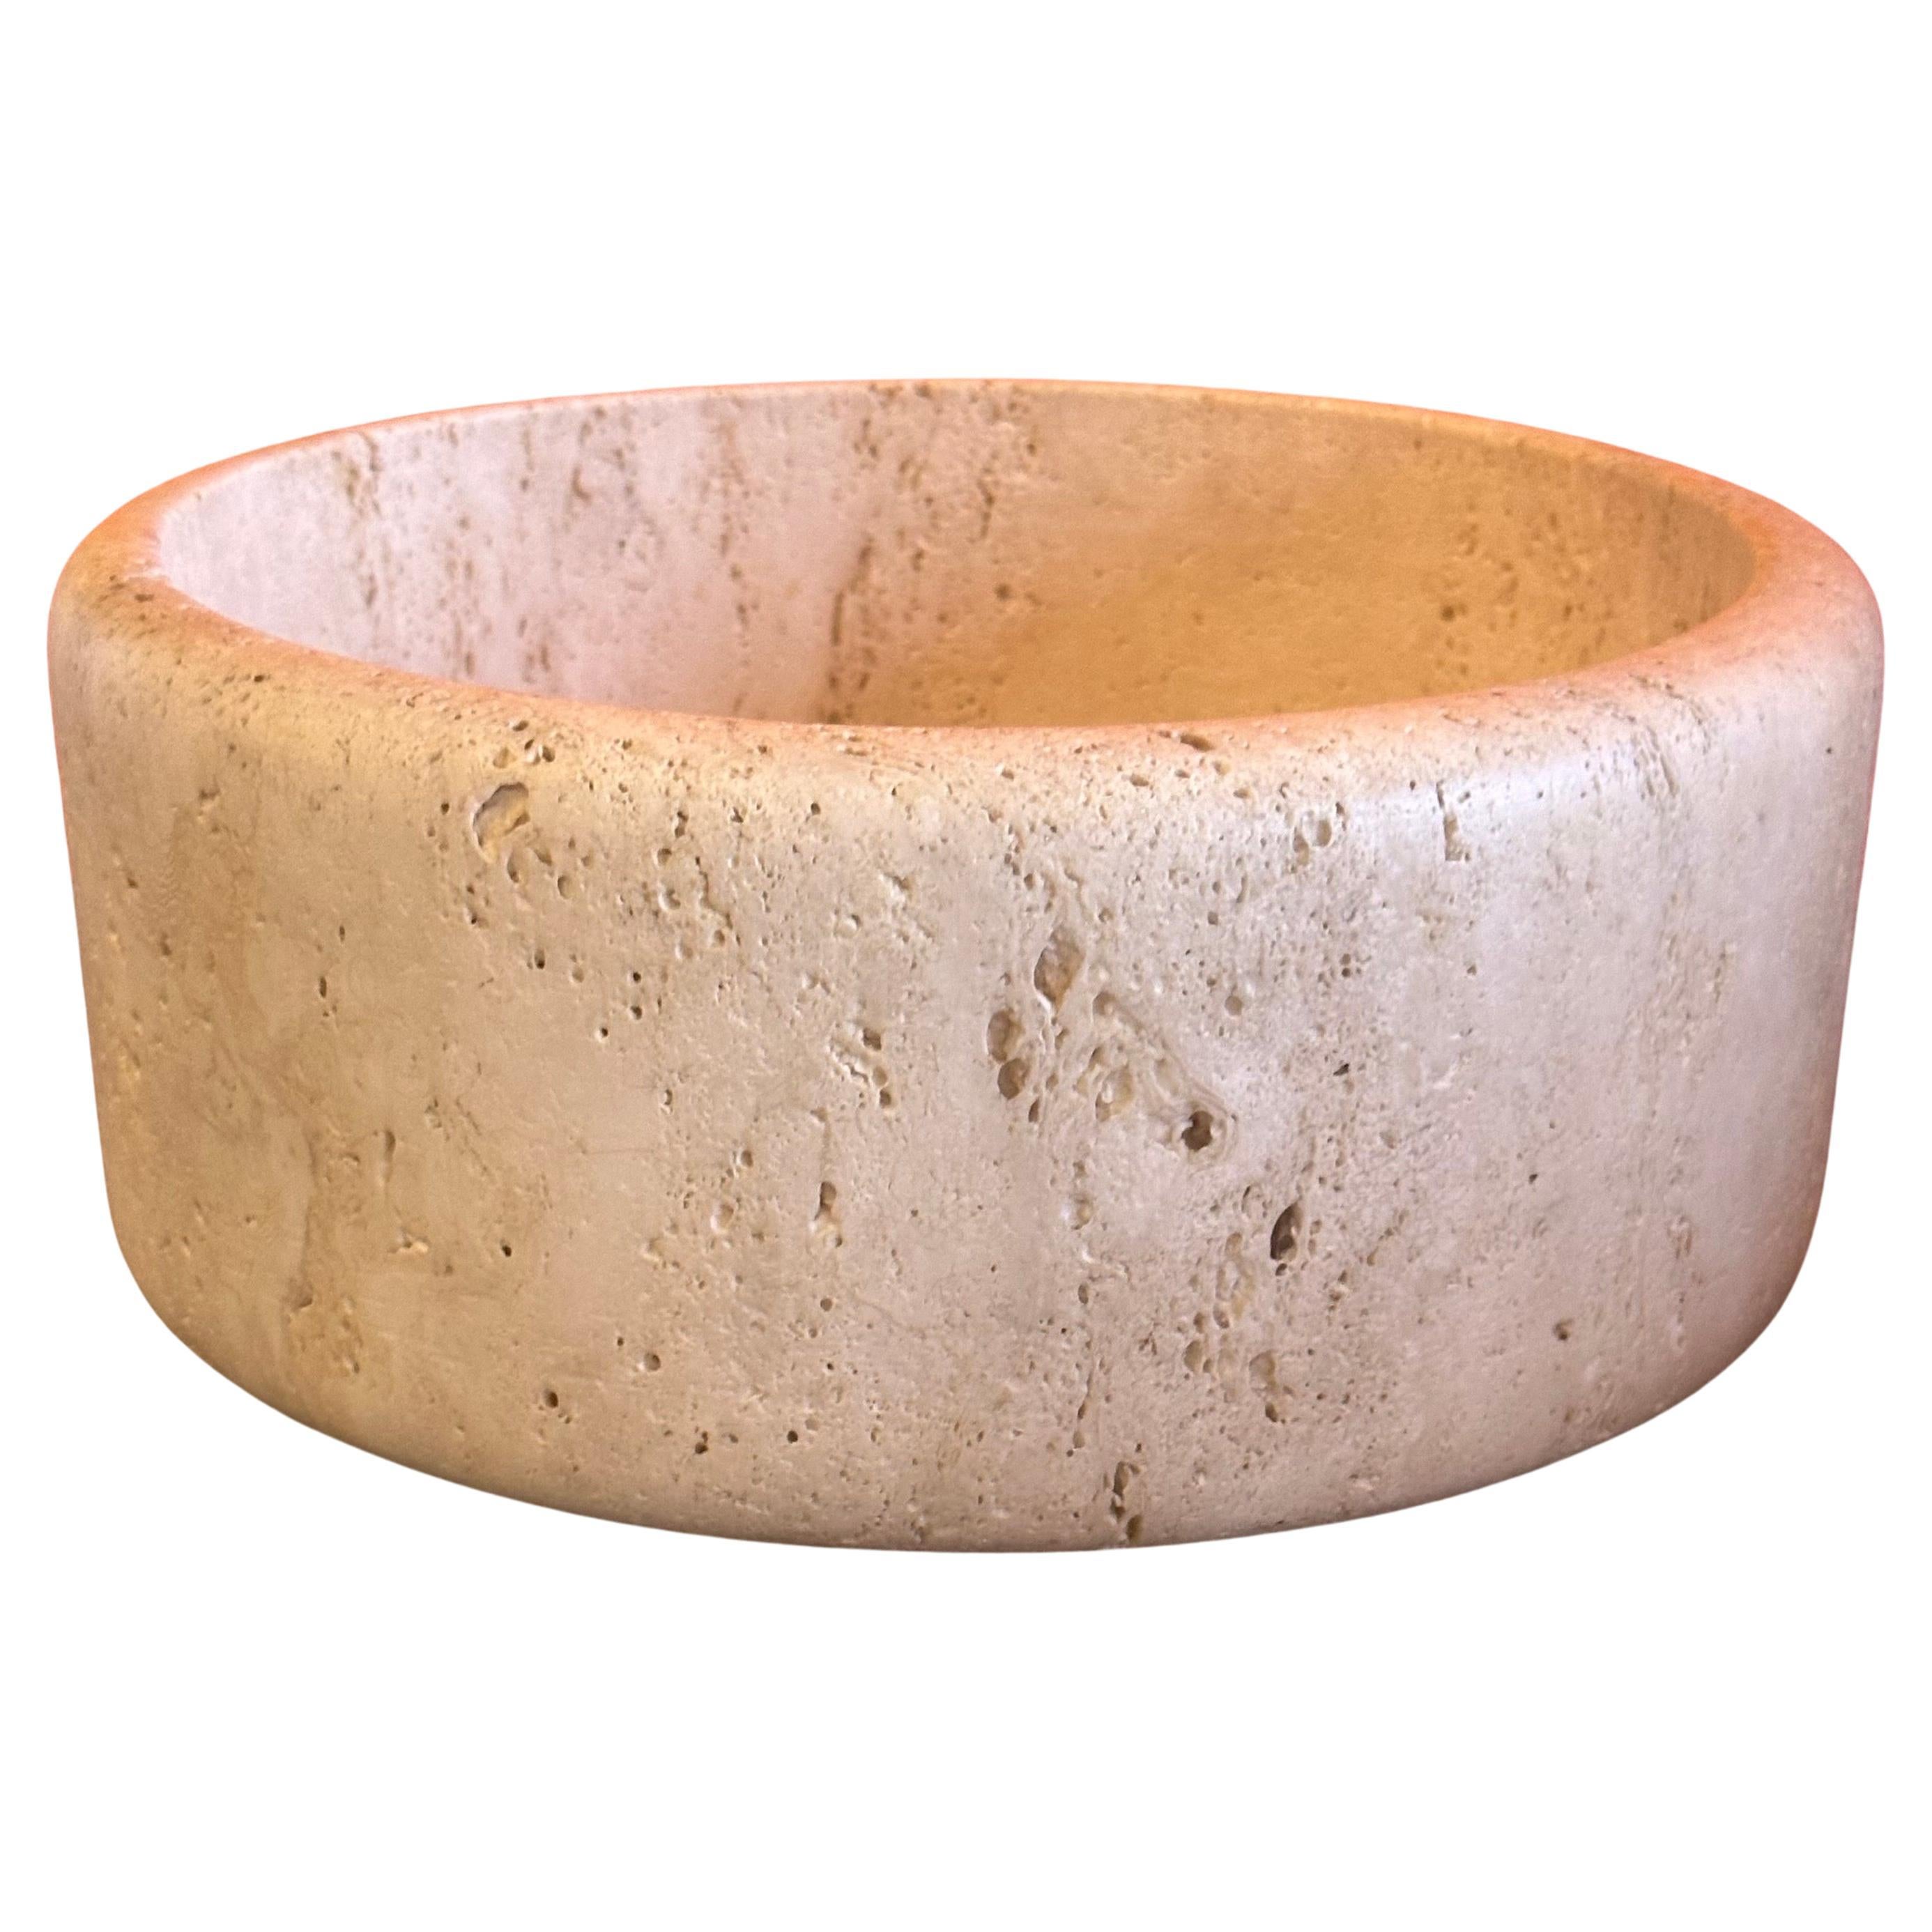 Gorgeous mid century modern Italian travertine fruit bowl / centerpiece by Raymor, circa 1970s. The bowl is in very good vintage condition and is 11.5